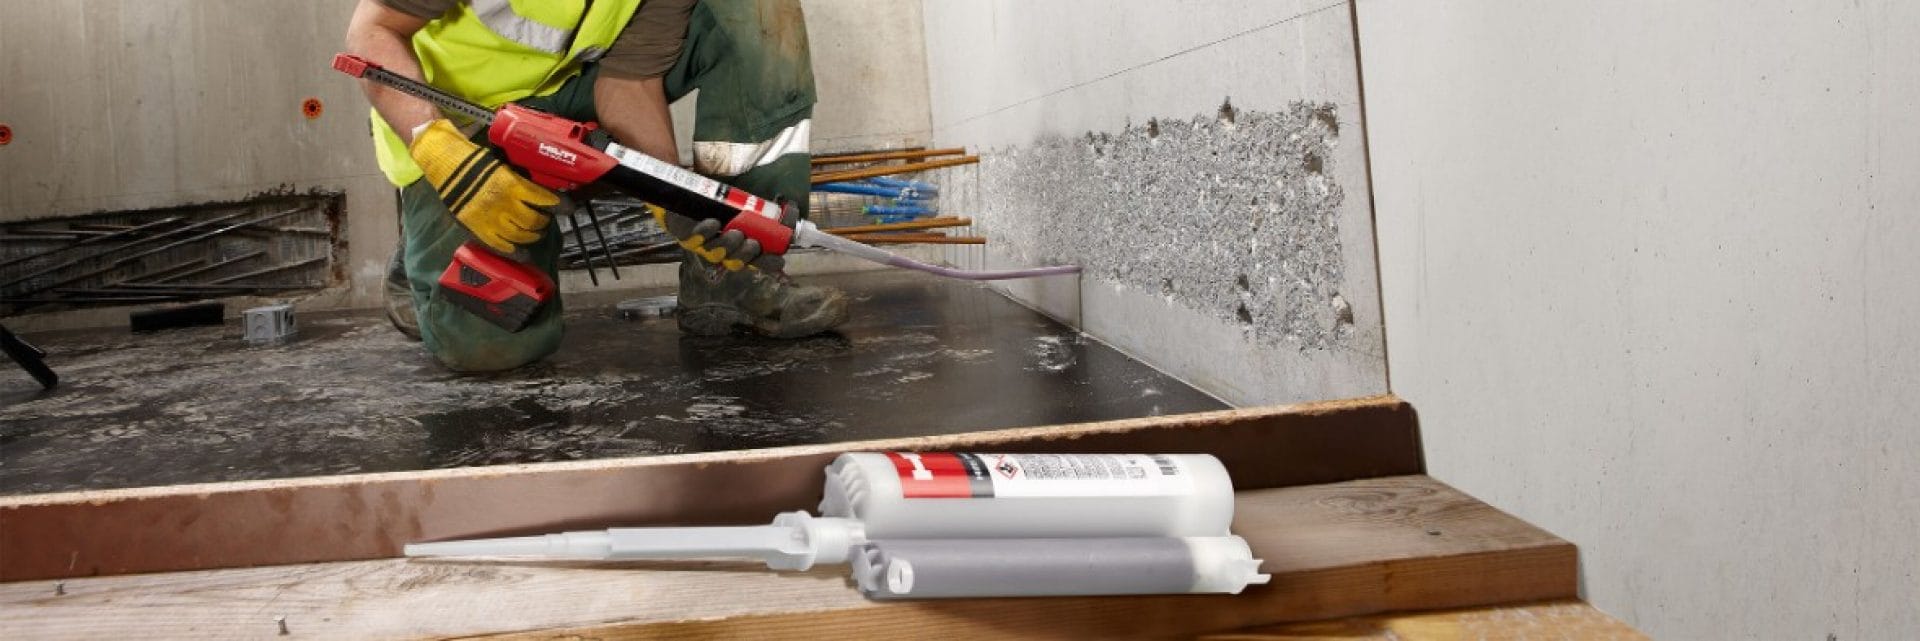 Hilti HIT-RE 10 injectable mortar system